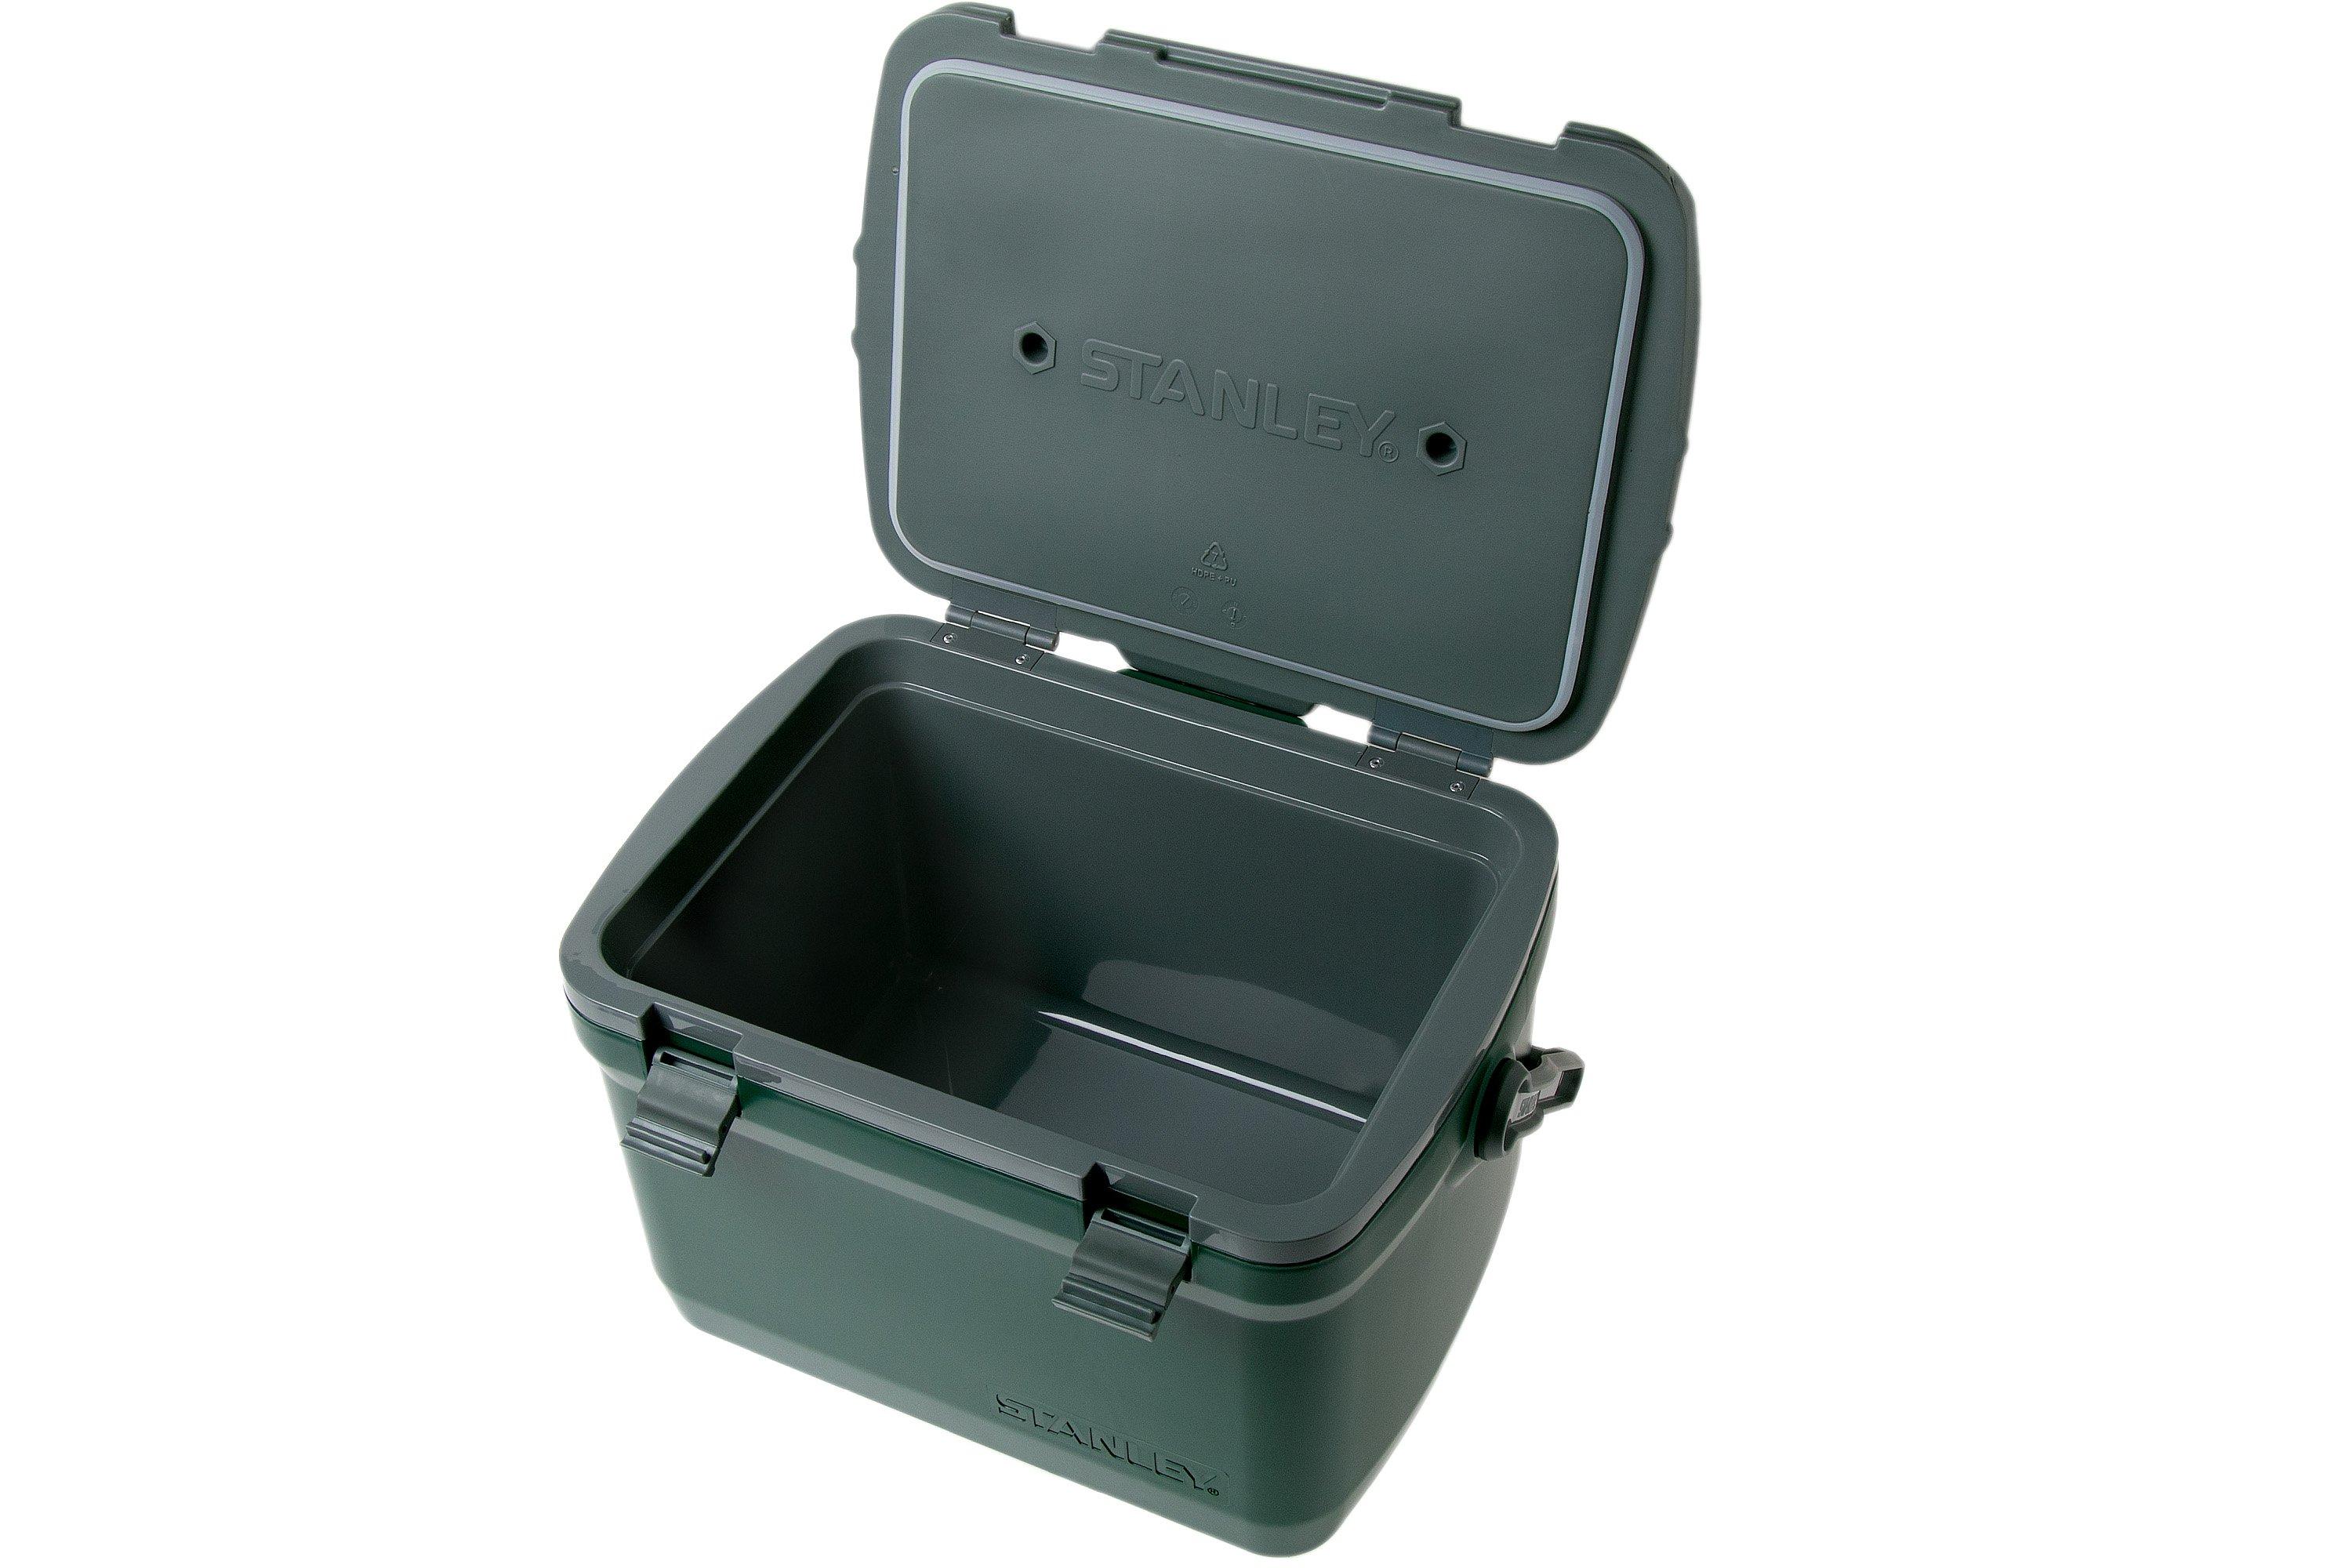 Adventure Easy Carry Lunch Cooler, 6.6 L